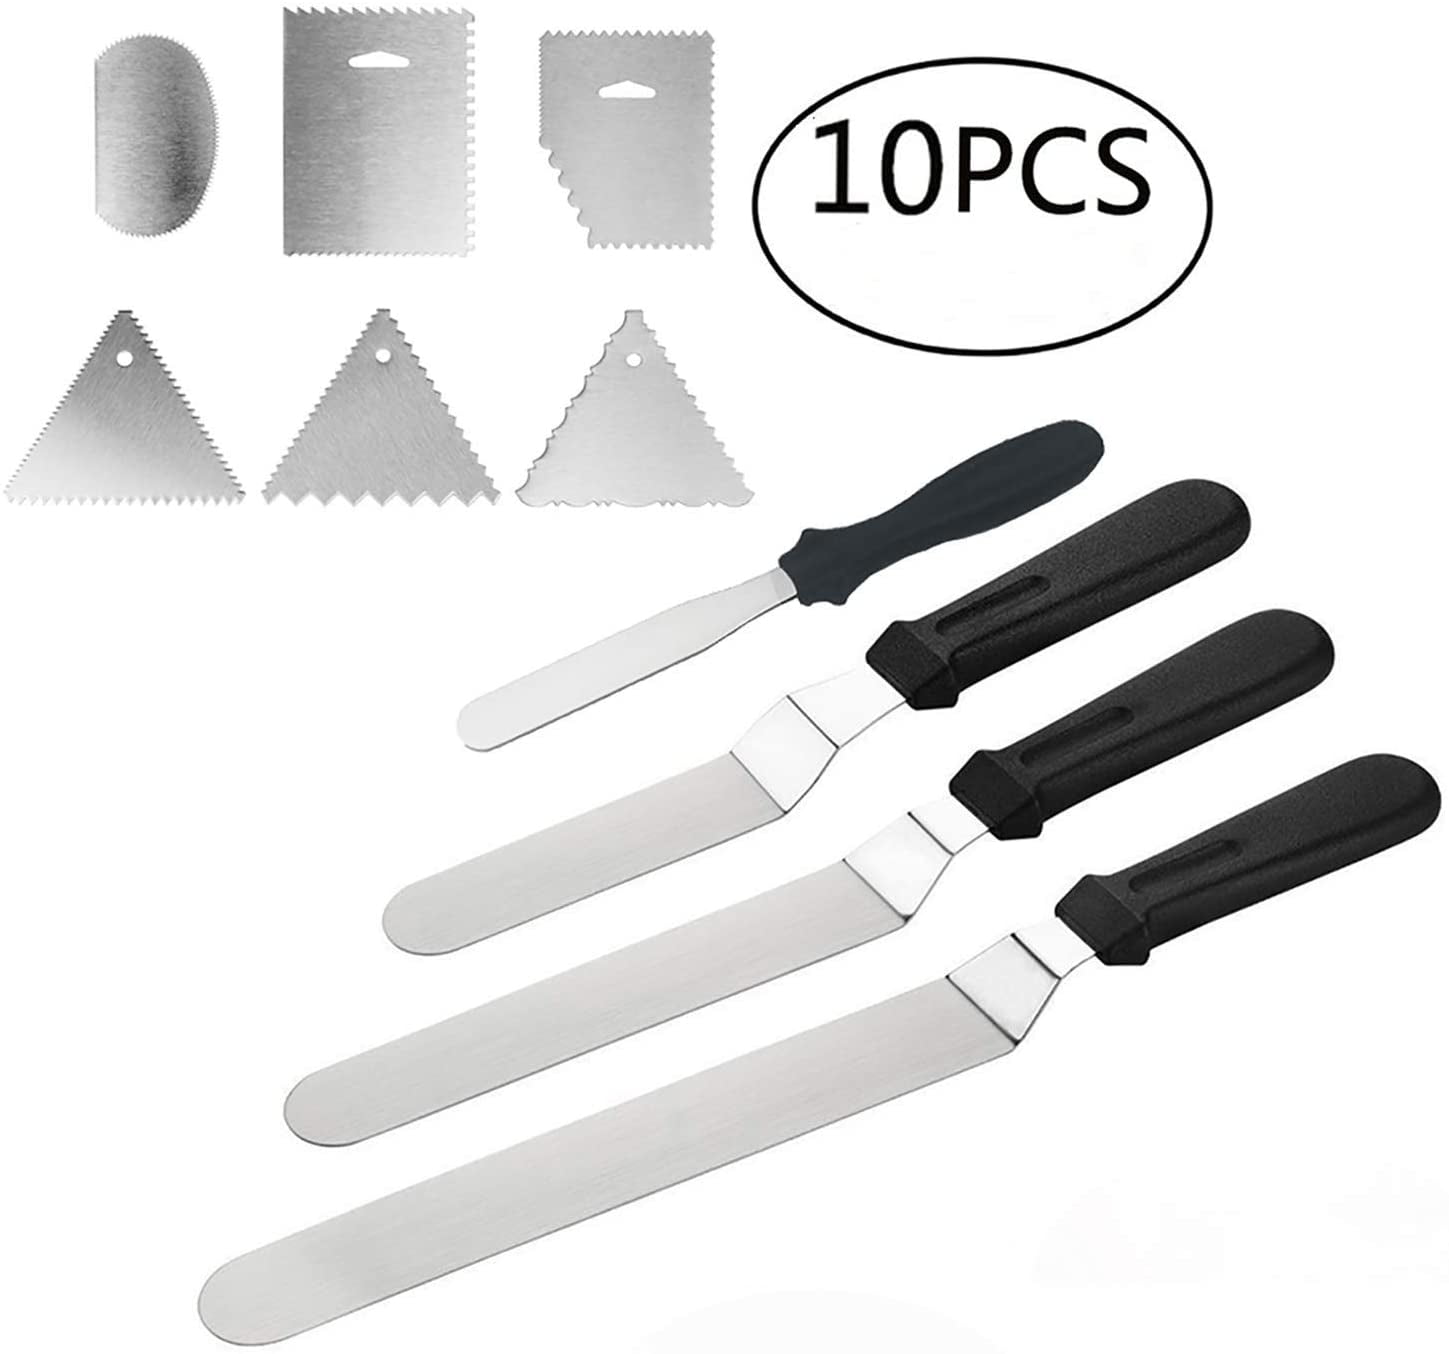 4 Angle Pallet Set Stainless Steel Spreaders Cake Knife, Angle Pallet ...